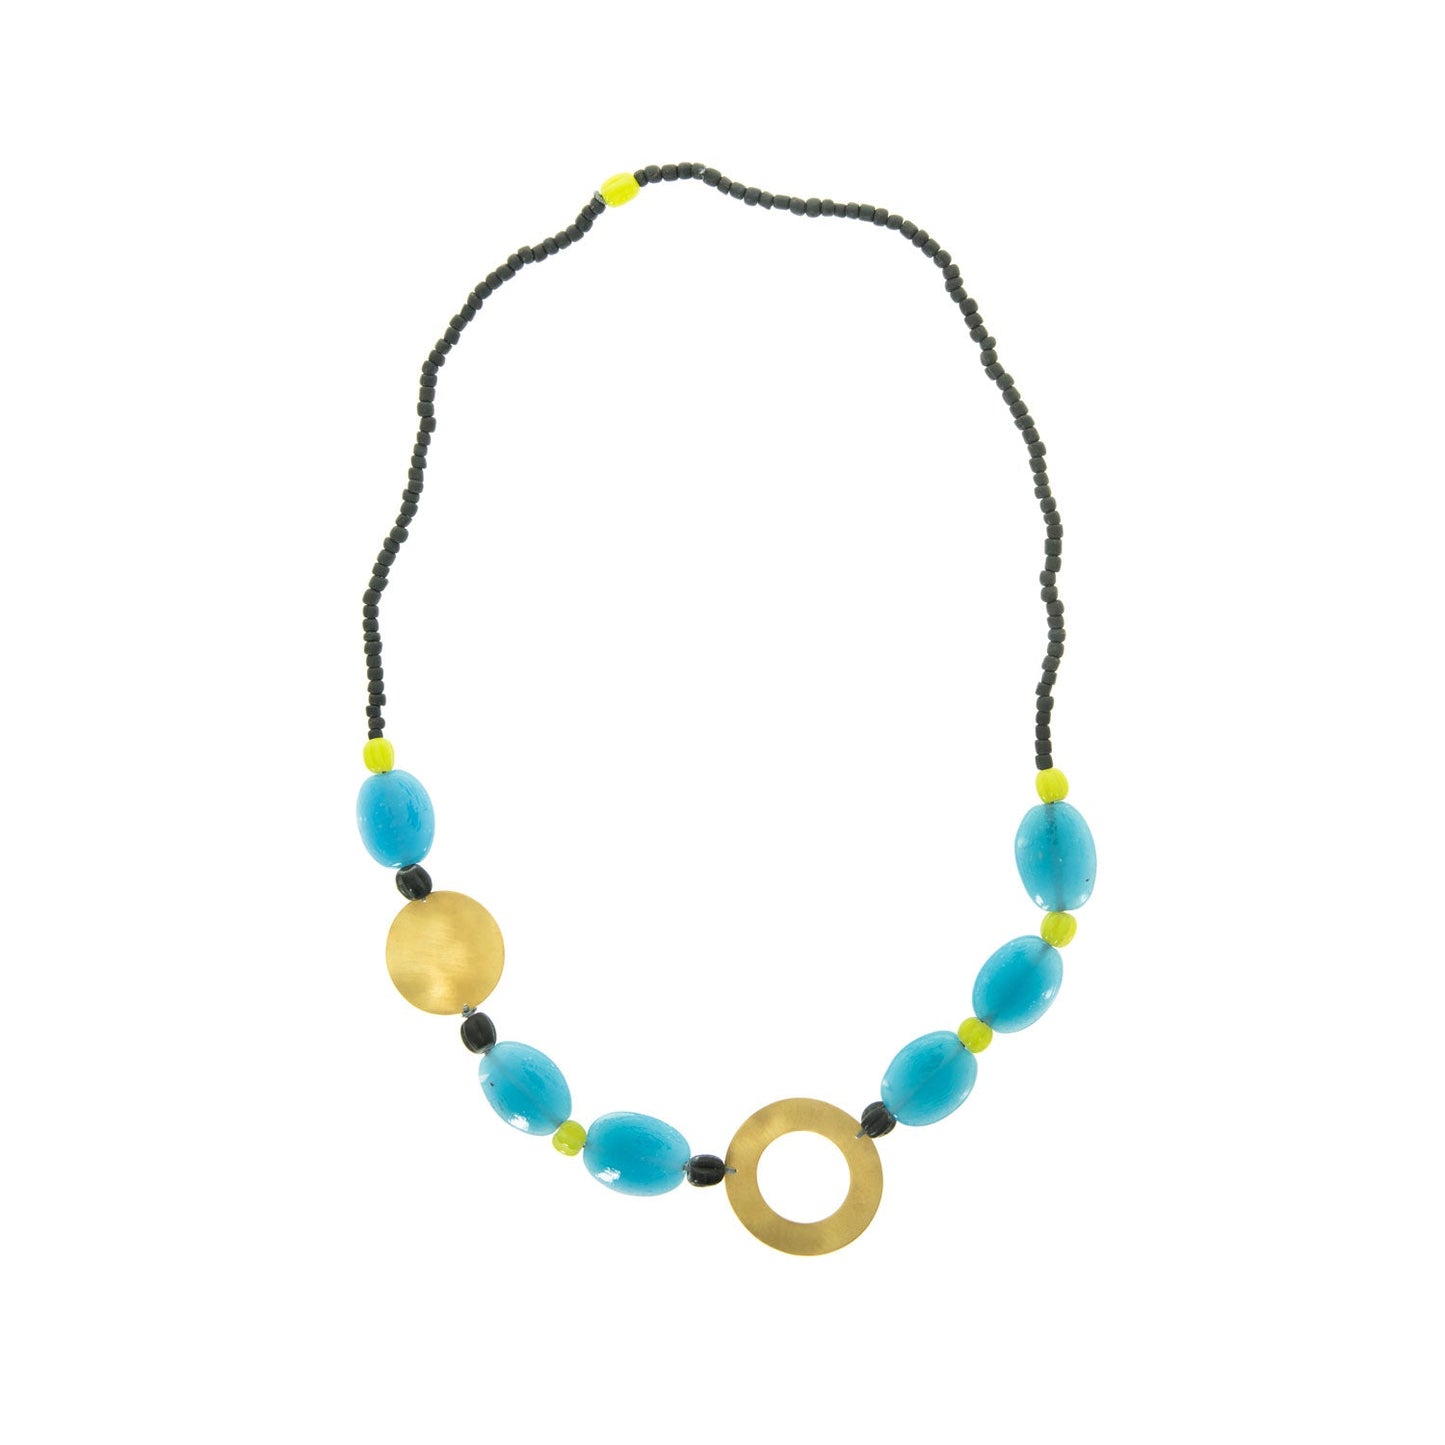 Necklace with small green beads around the neck end and larger blue and yellow beads along the drop. There is a brass disc to the left and a brass circle with a cut out just off centre of the drop.